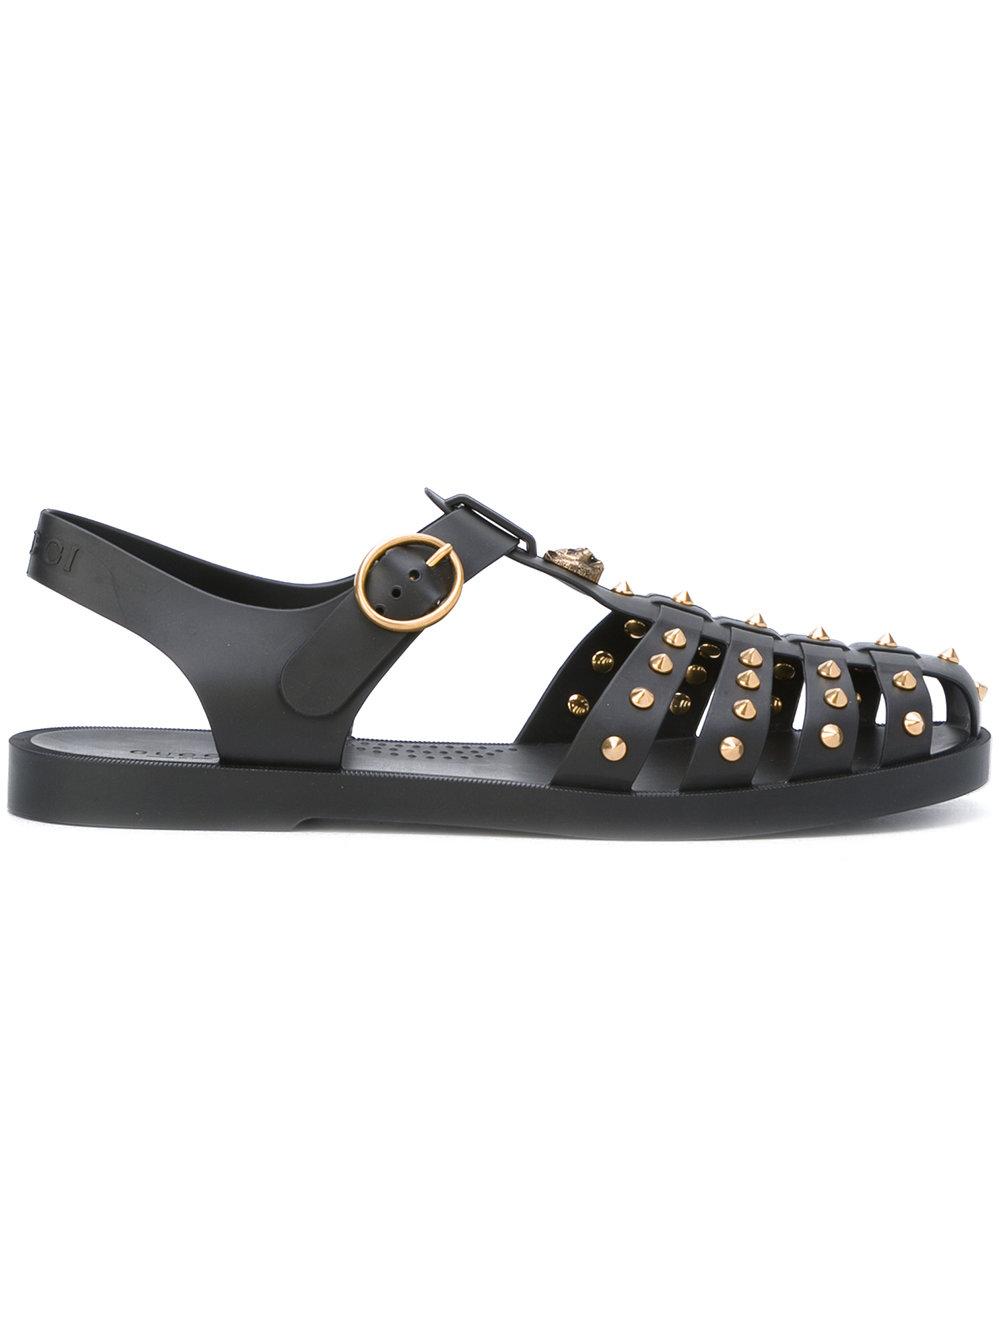 Lyst - Gucci Buckle Strap Sandals in Black for Men